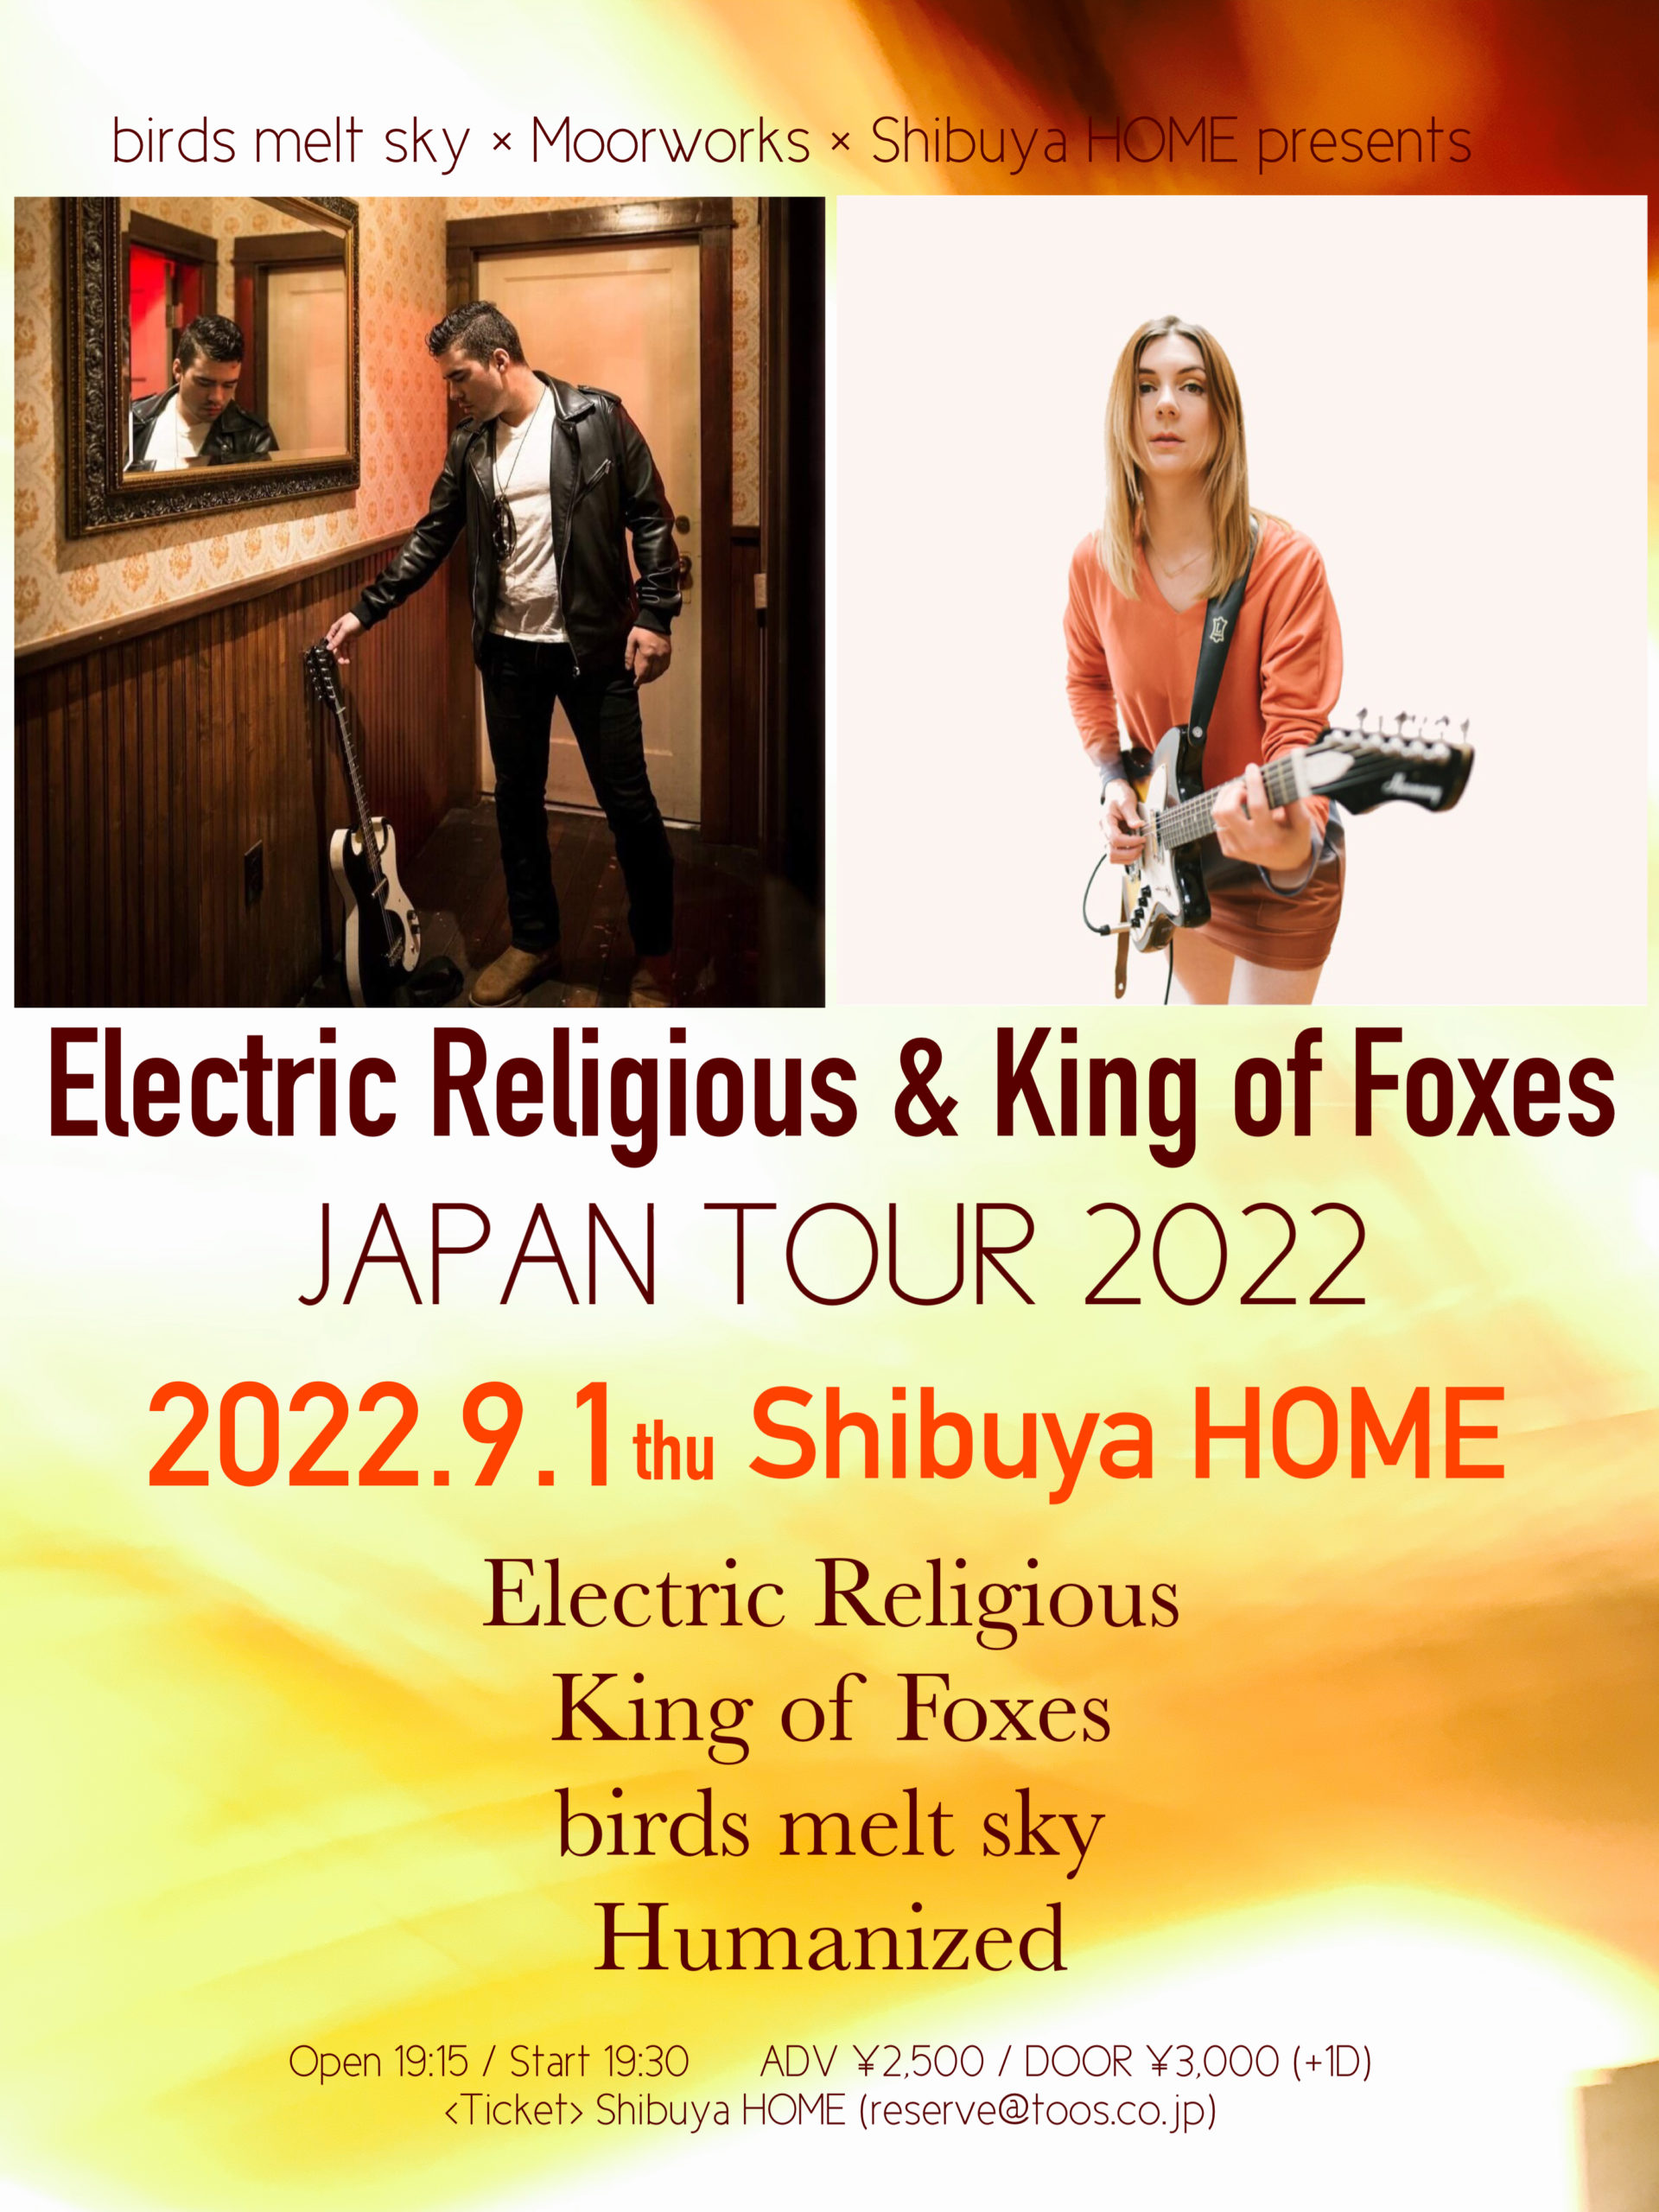 birds melt sky × Moorworks × Shibuya HOME presents Electric Religious & King of Foxes JAPAN TOUR